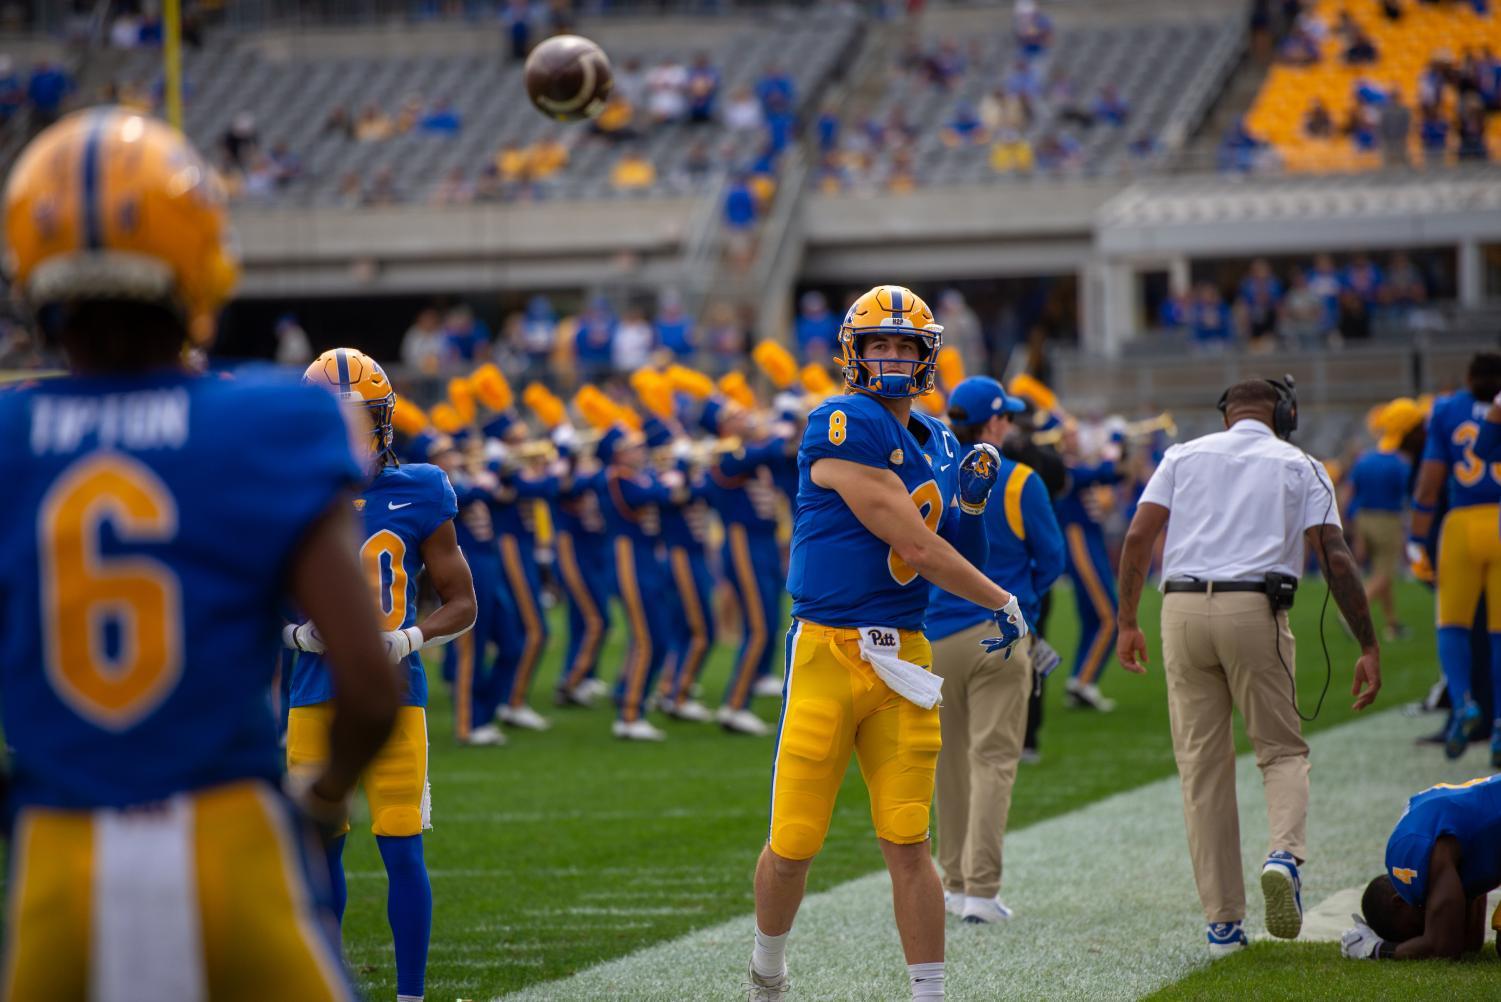 Kenny Pickett practices throwing the ball on the sidelines of the Pitt vs. UNH game in September.